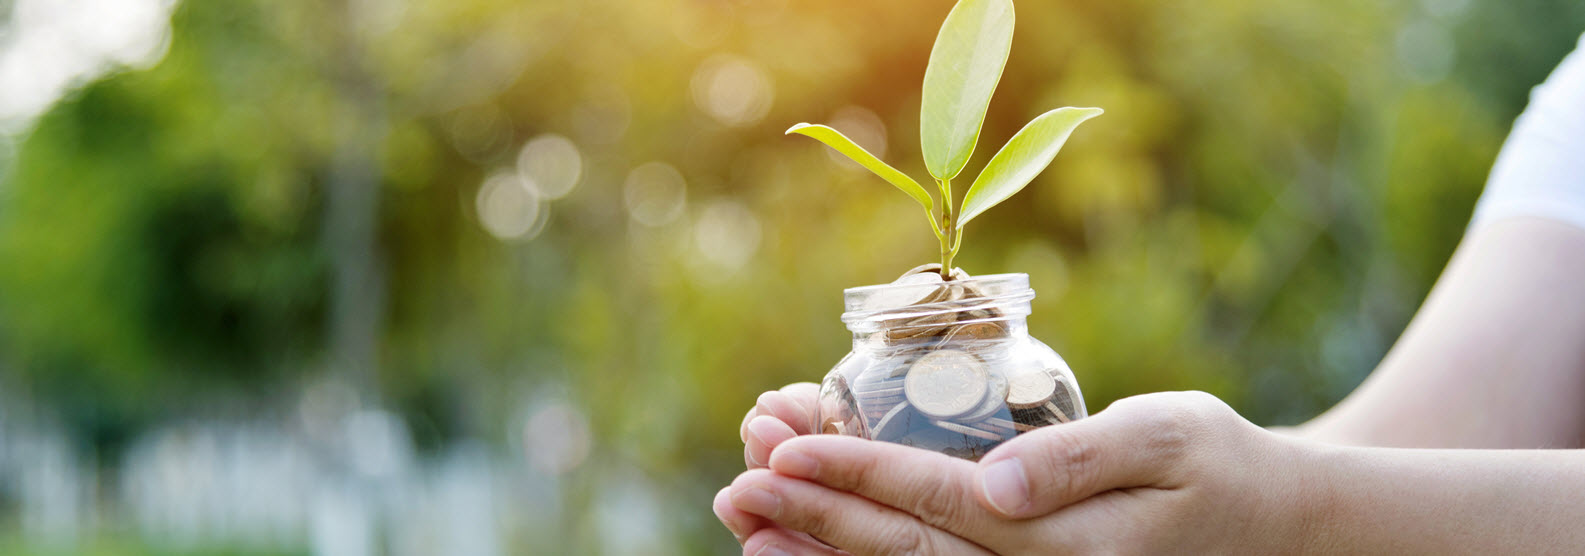 outstretched young hands holding a jar of coins with a small green plant growing out of the top